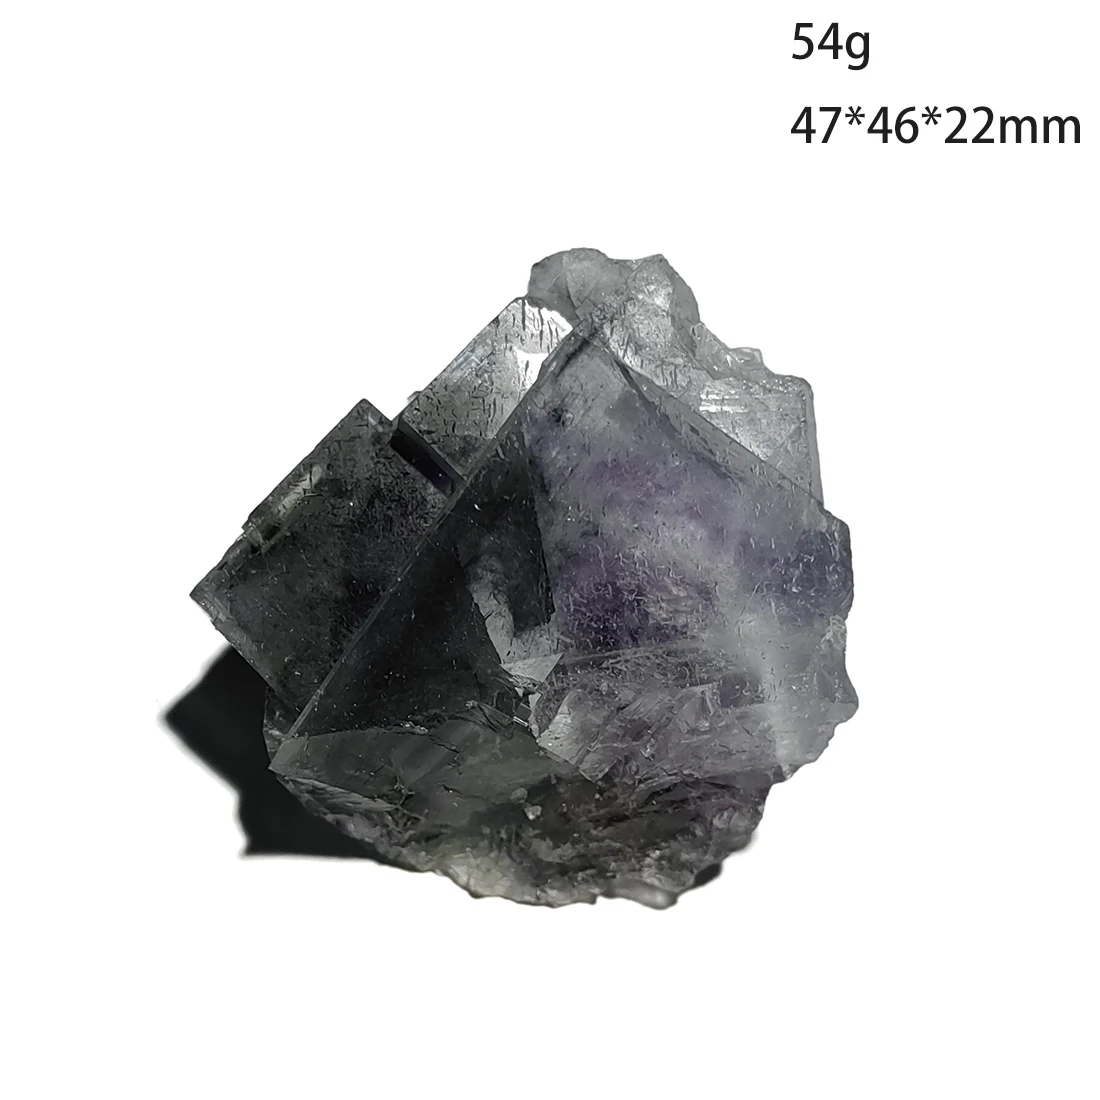 

C3-6H 100% Natural Purple Fluorite Mineral Crystal Specimen Collection From Yaogangxian Hunan Province China